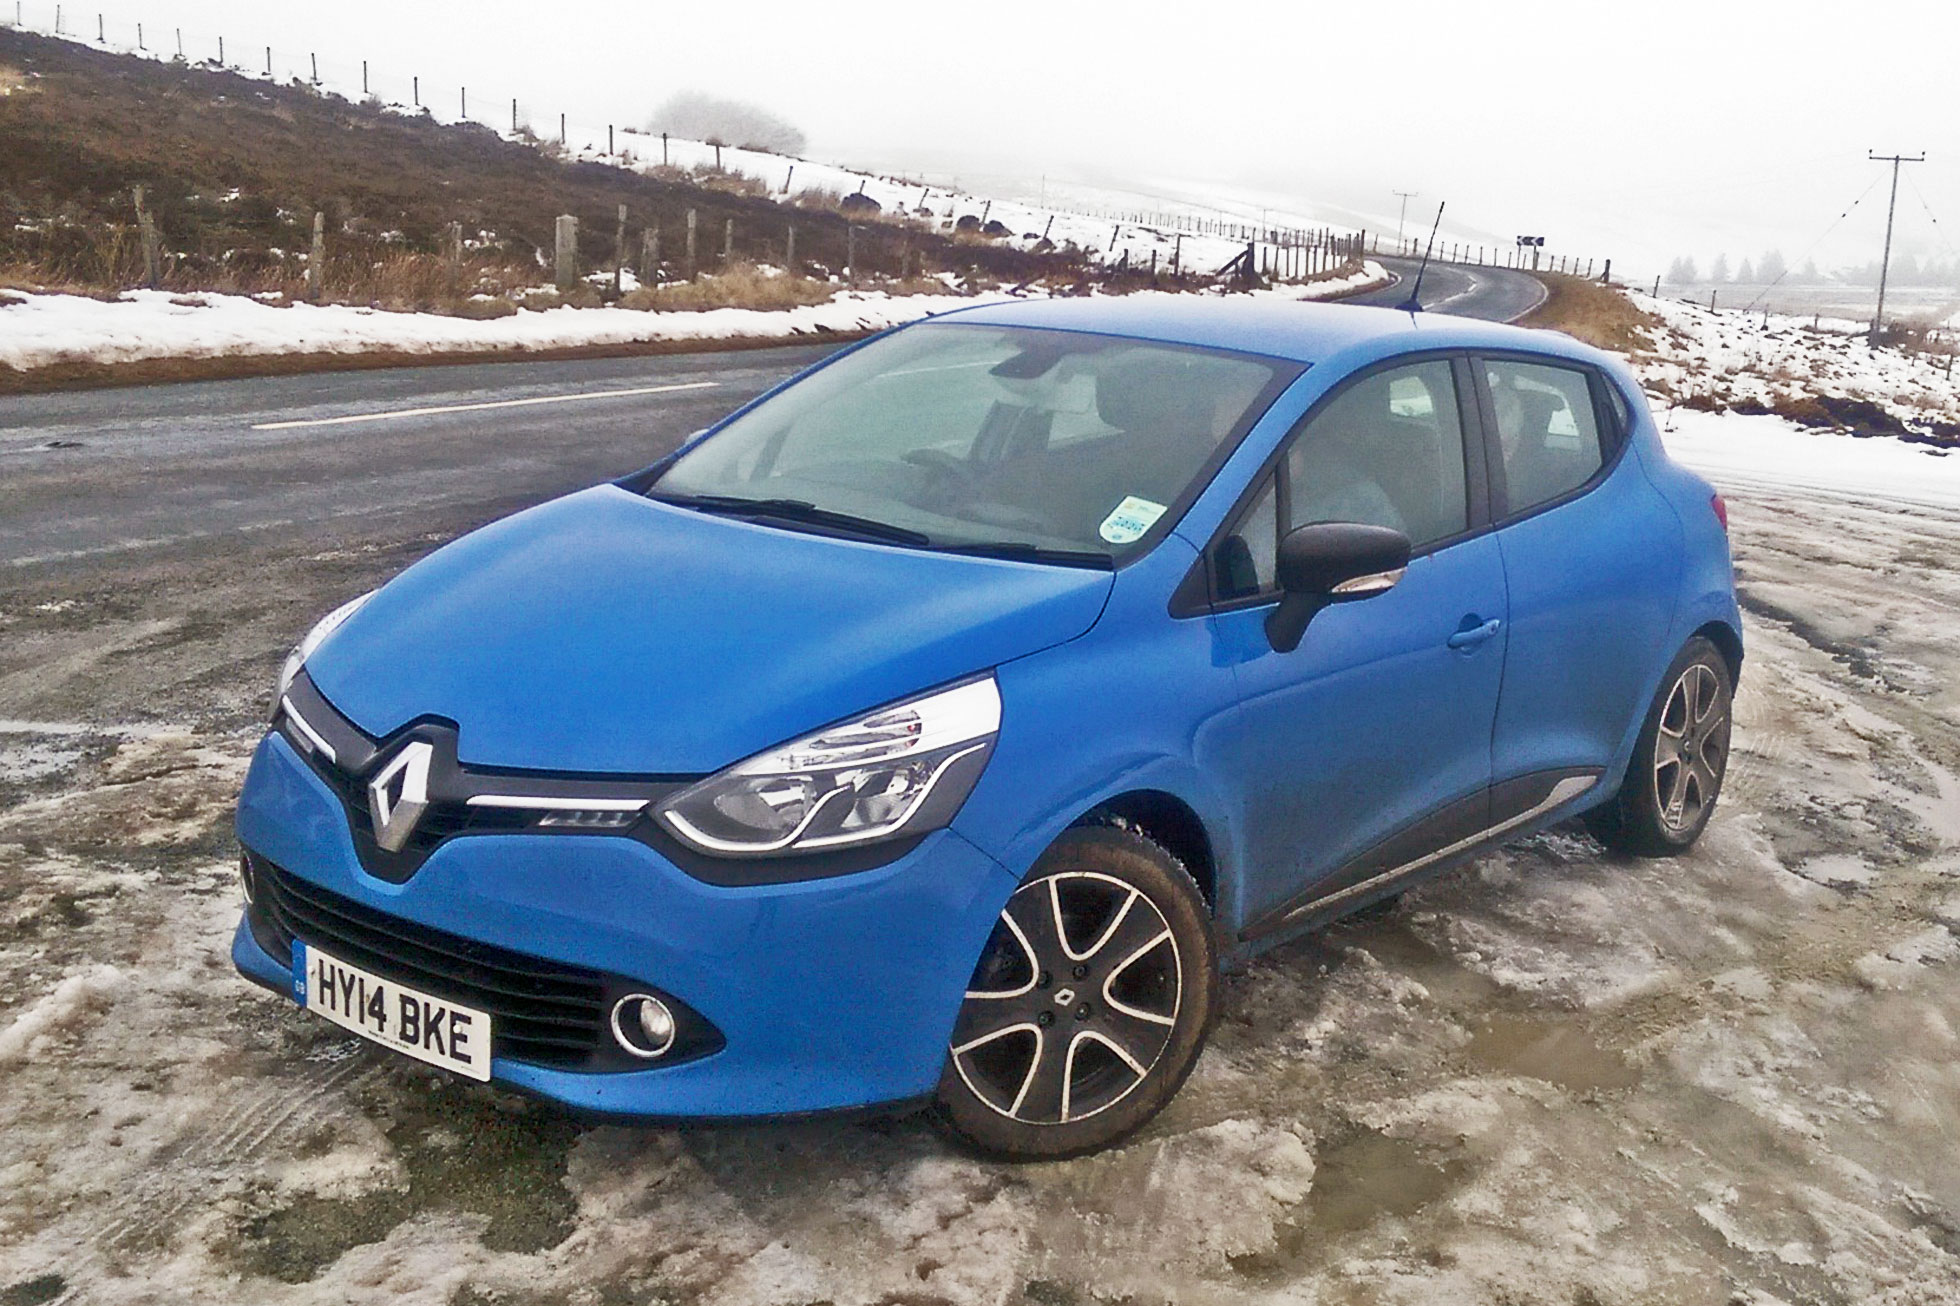 Plons Oh Koloniaal Renault Clio 1.5 dCi 86 eco2 (2014) long-term review - Motoring Research